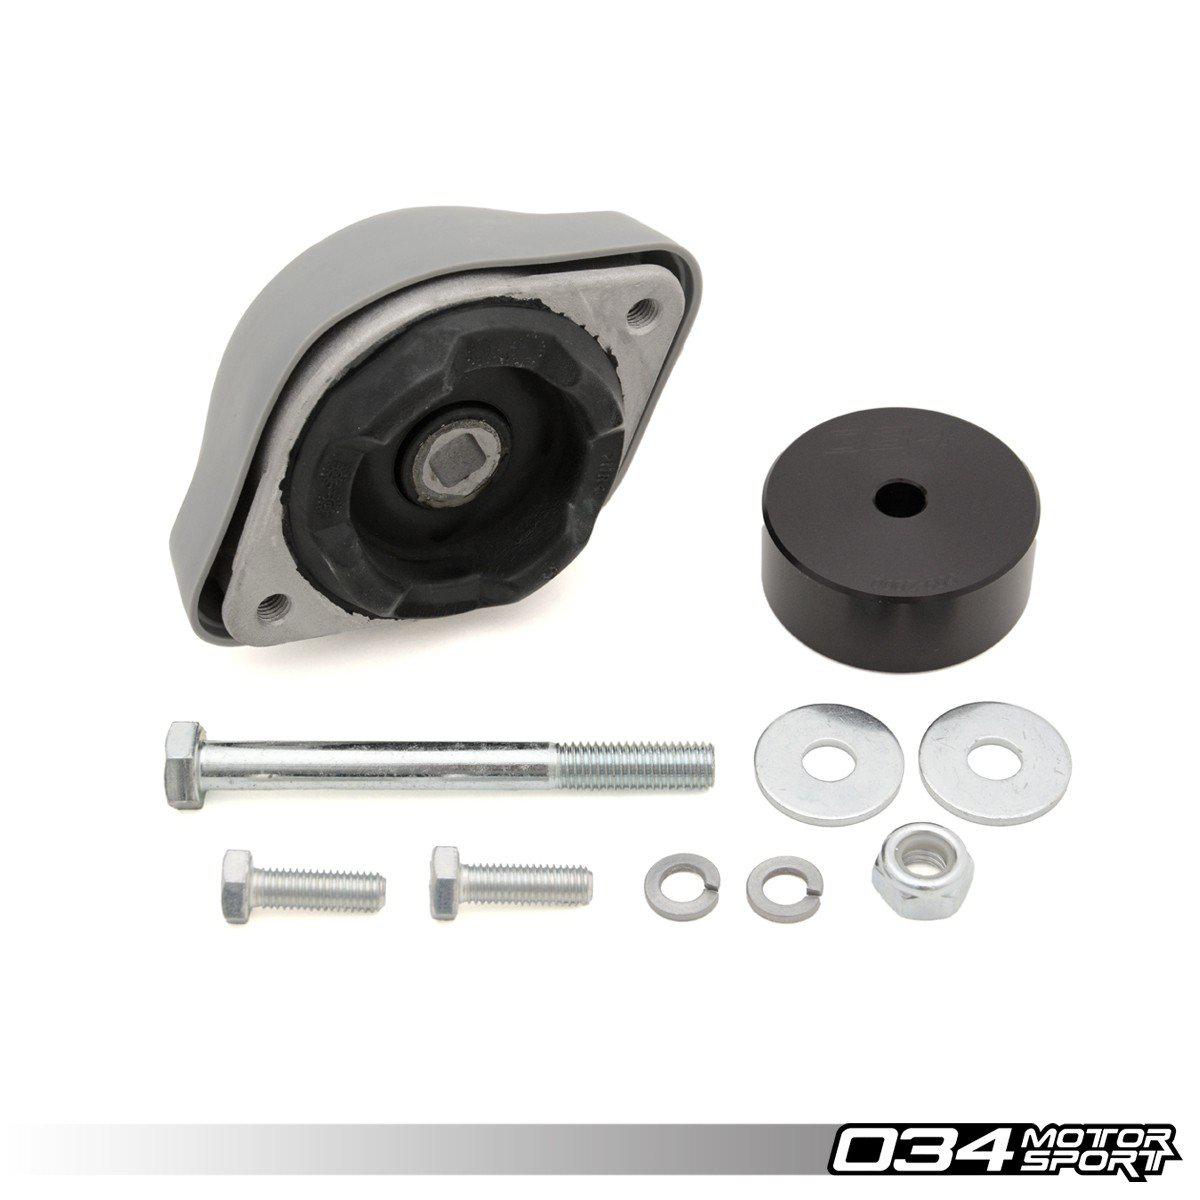 Transmission Mount, Density Line, Tiptronic B6/B7/C5 Audi A4/S4/S6/RS6-A Little Tuning Co